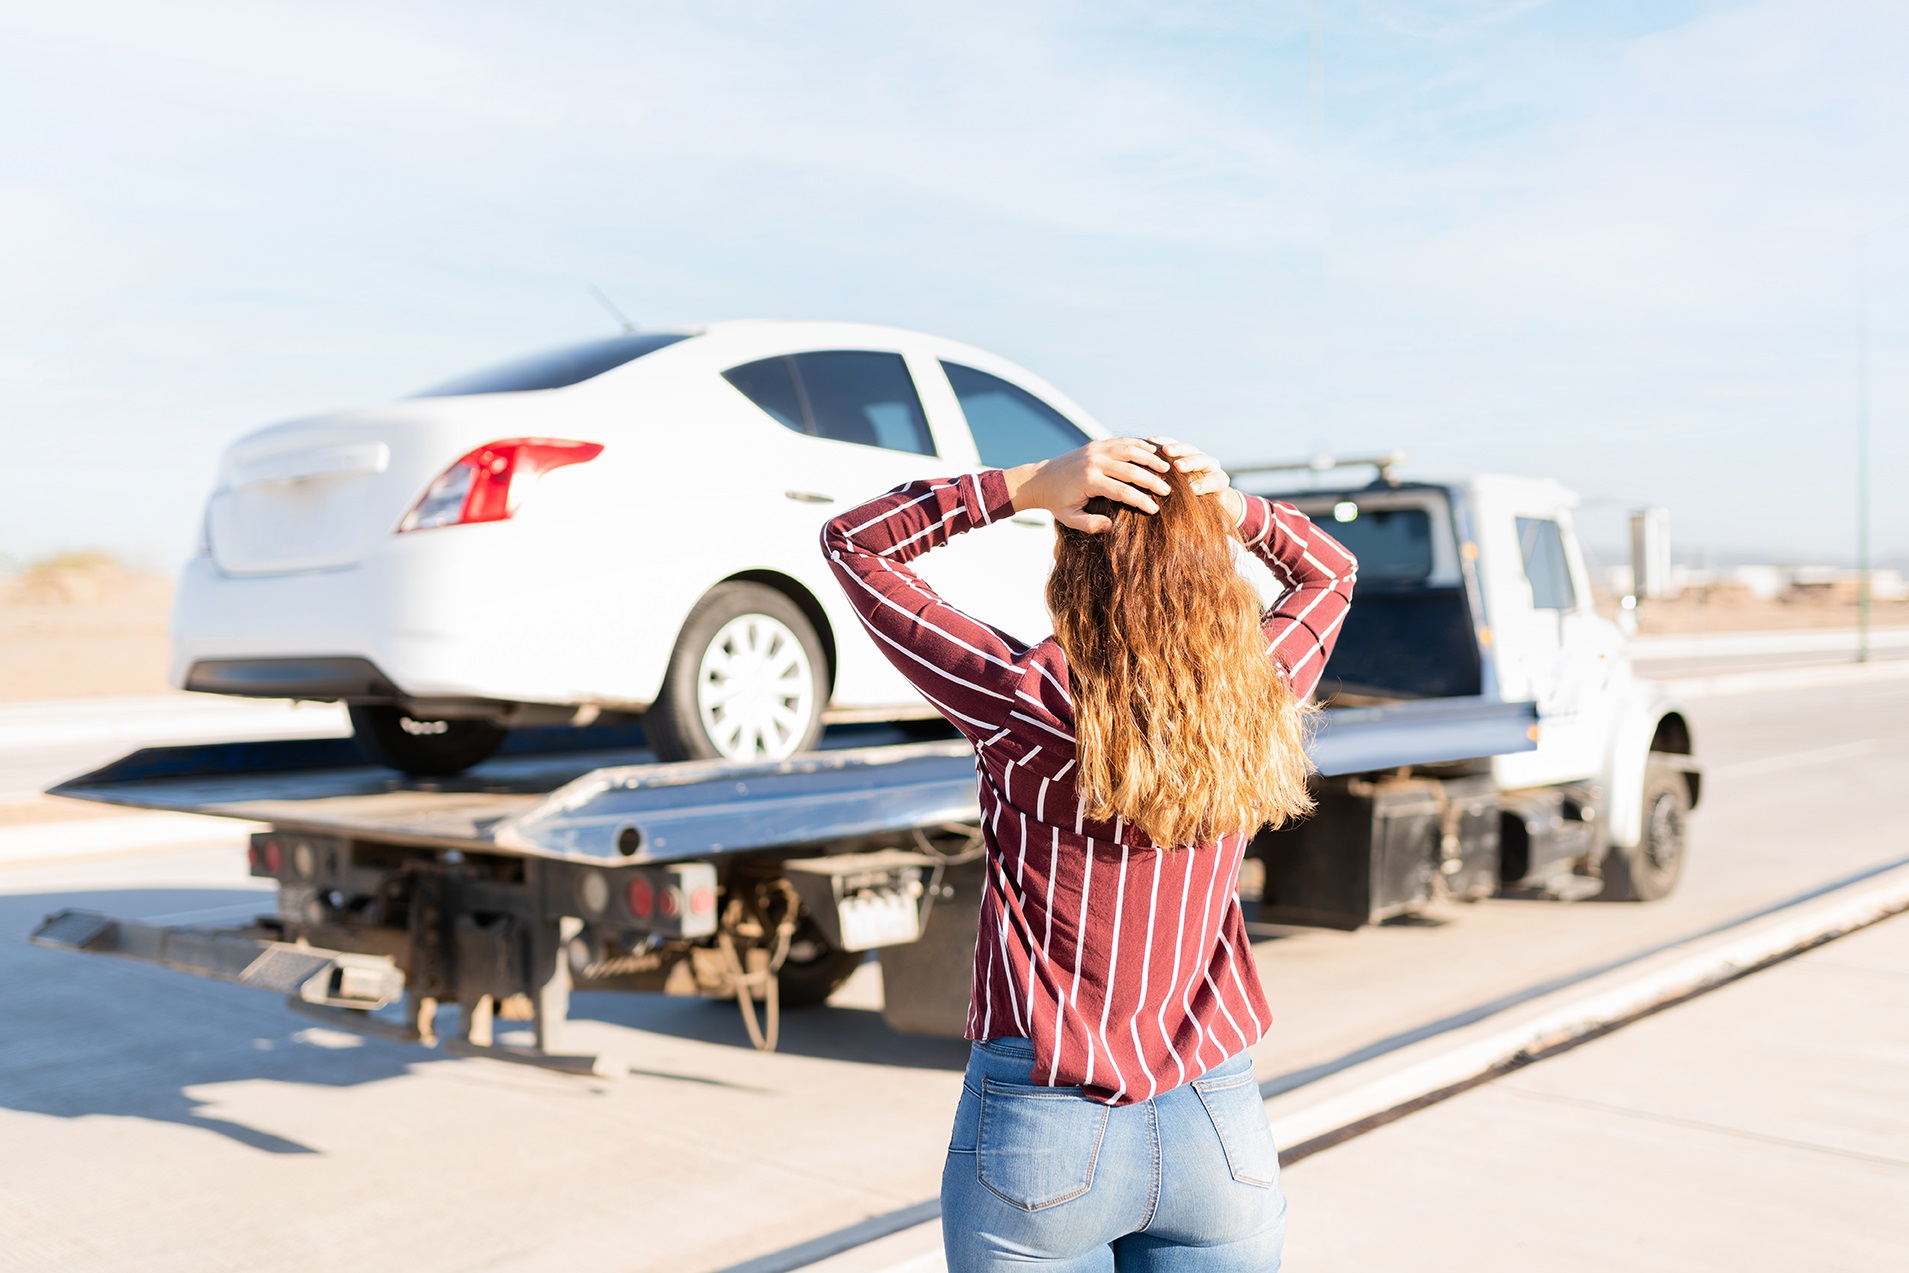 Rear view of an angry woman watching her car on a tow truck